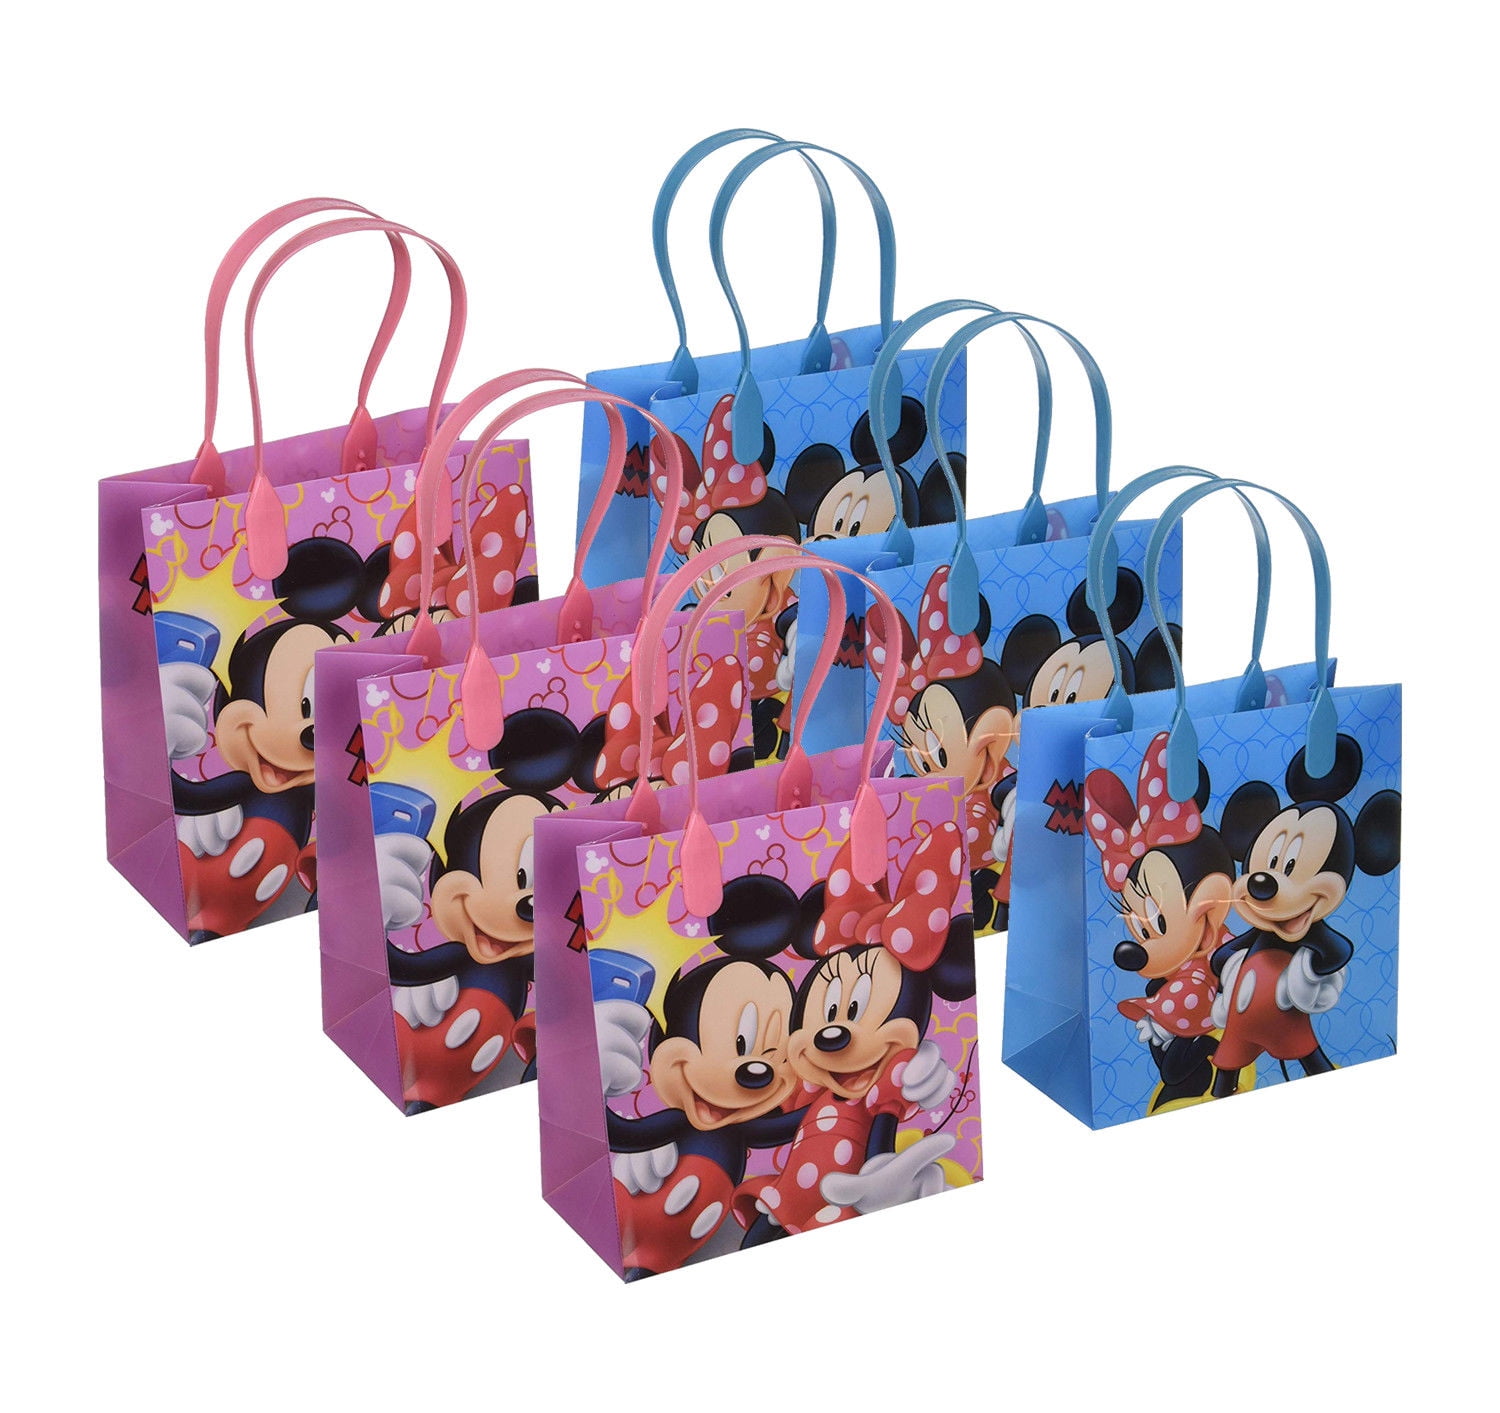 10ct Mickey Mouse Favor Candy/Treat Boxes Loot Bag Goody Treat Bag